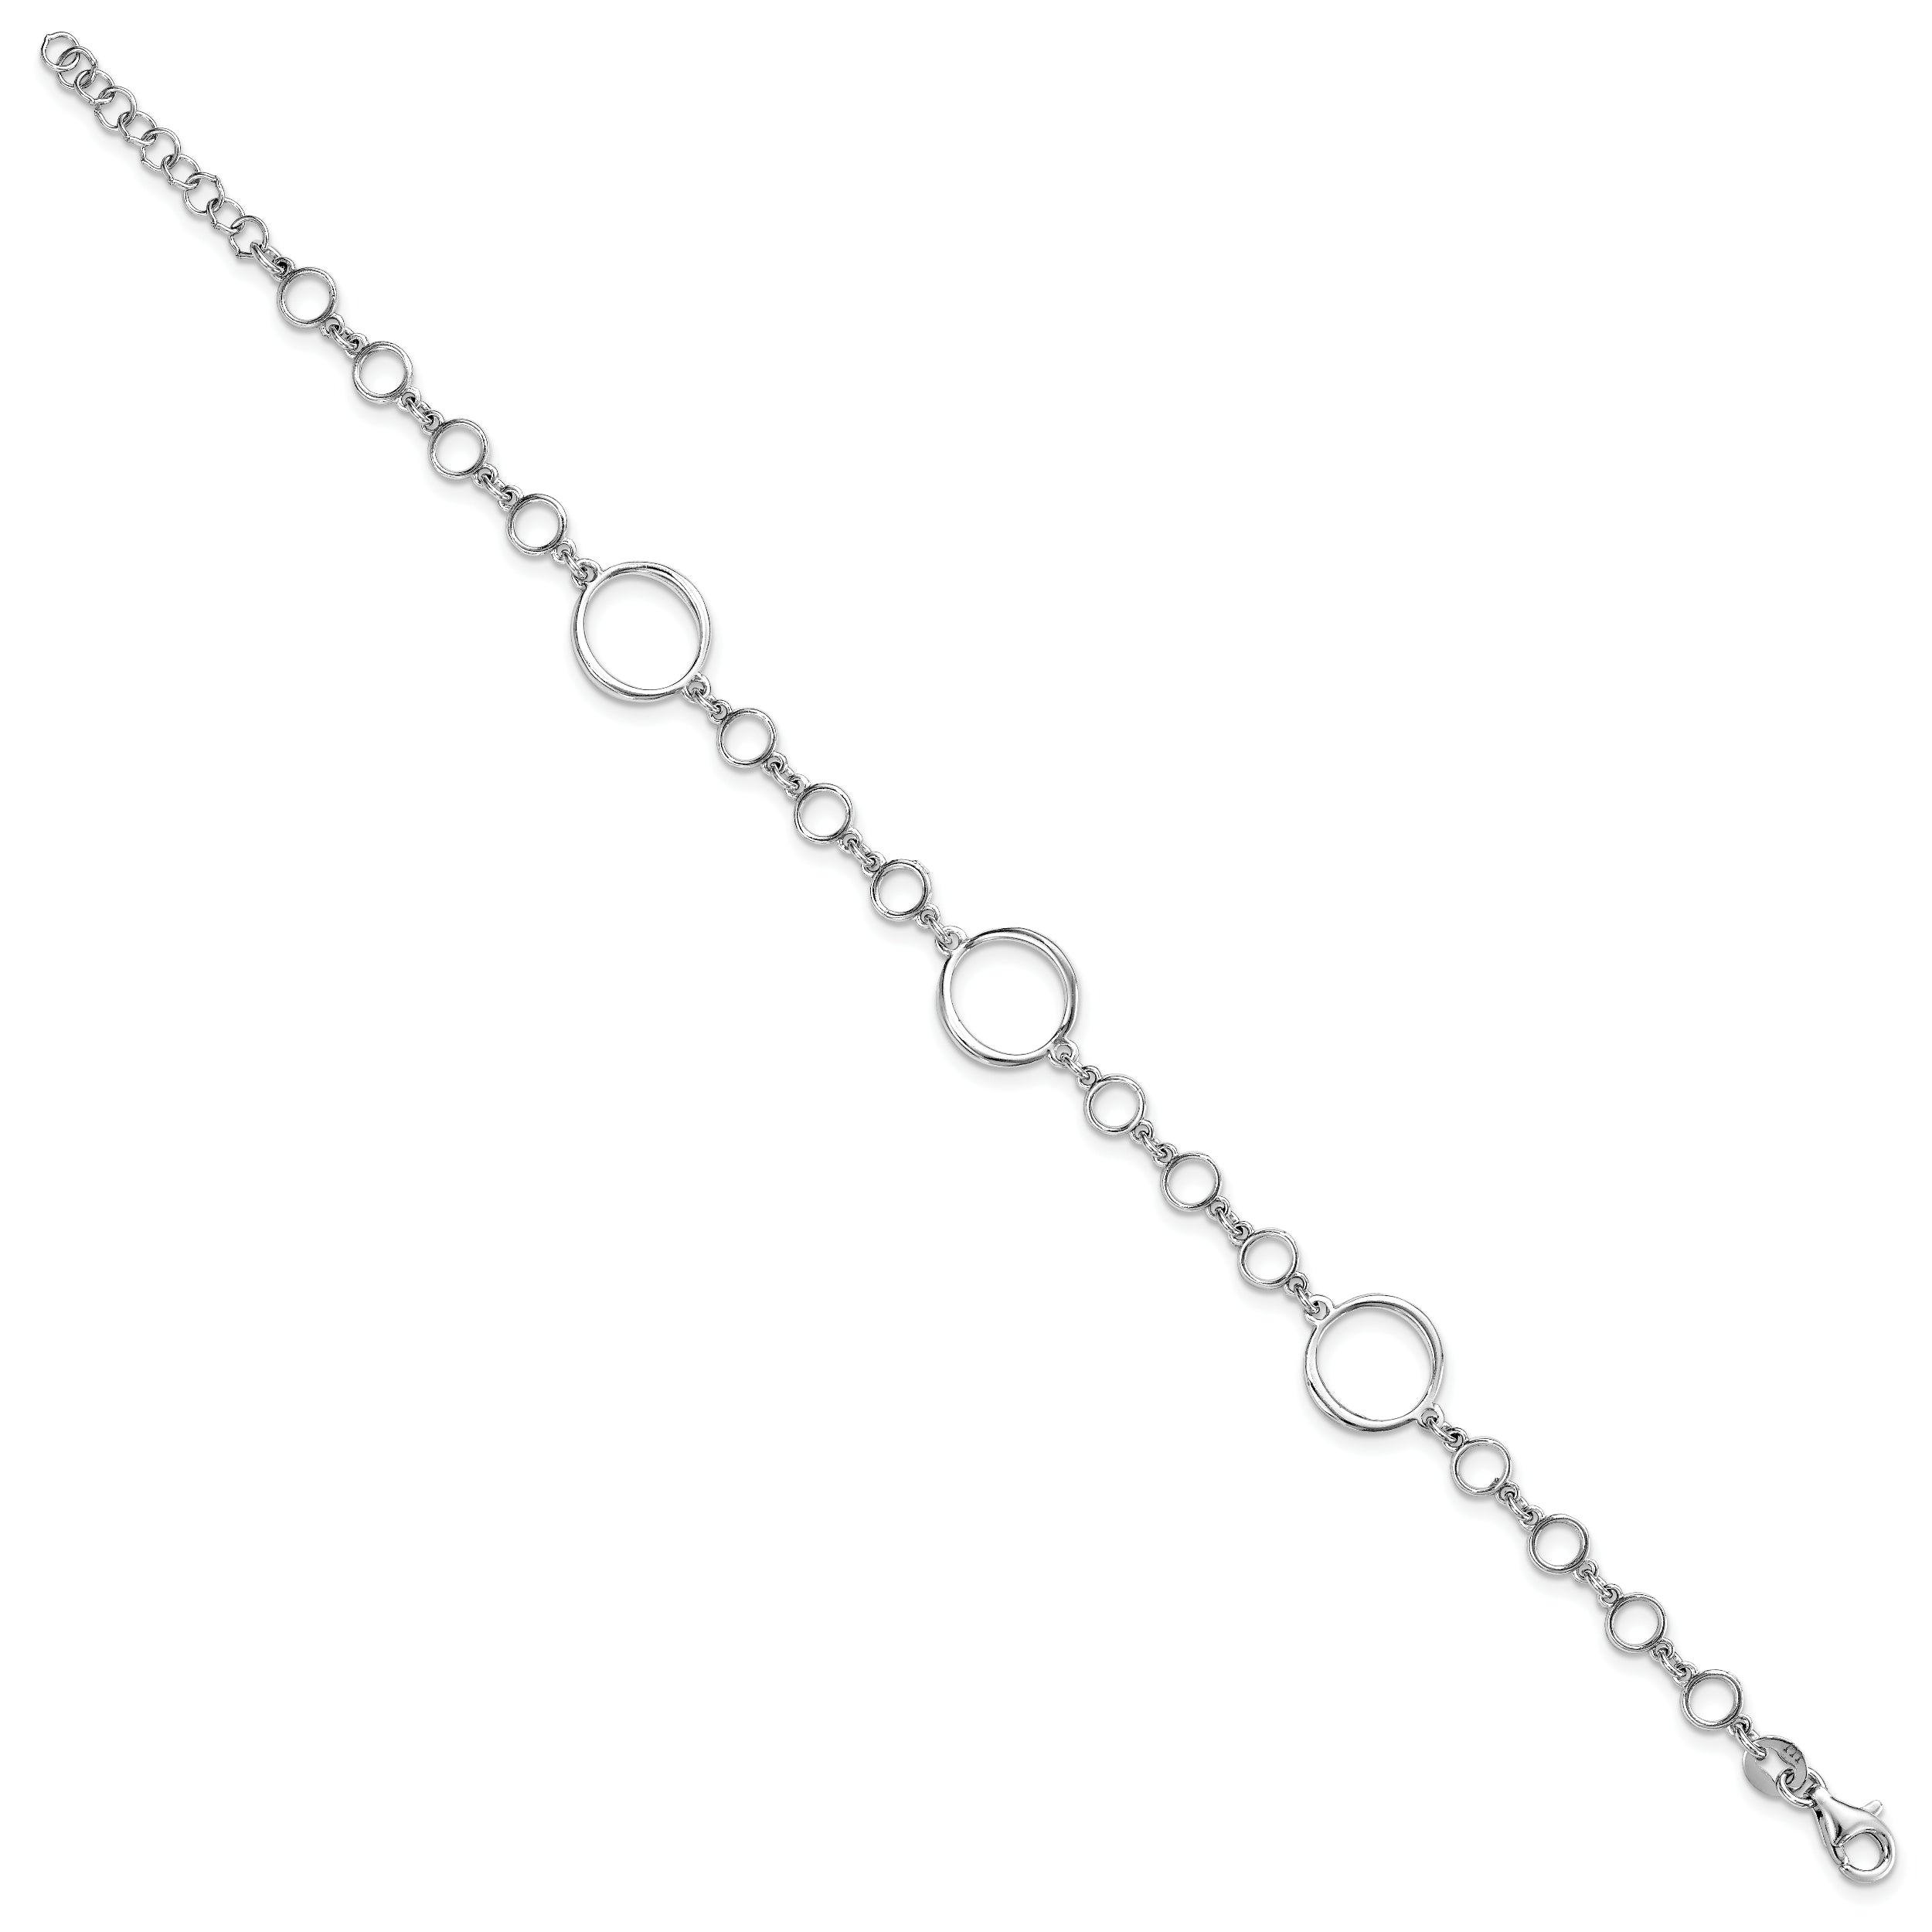 Sterling Silver Rhodium-plated Polished Link w/ 1in ext. Bracelet